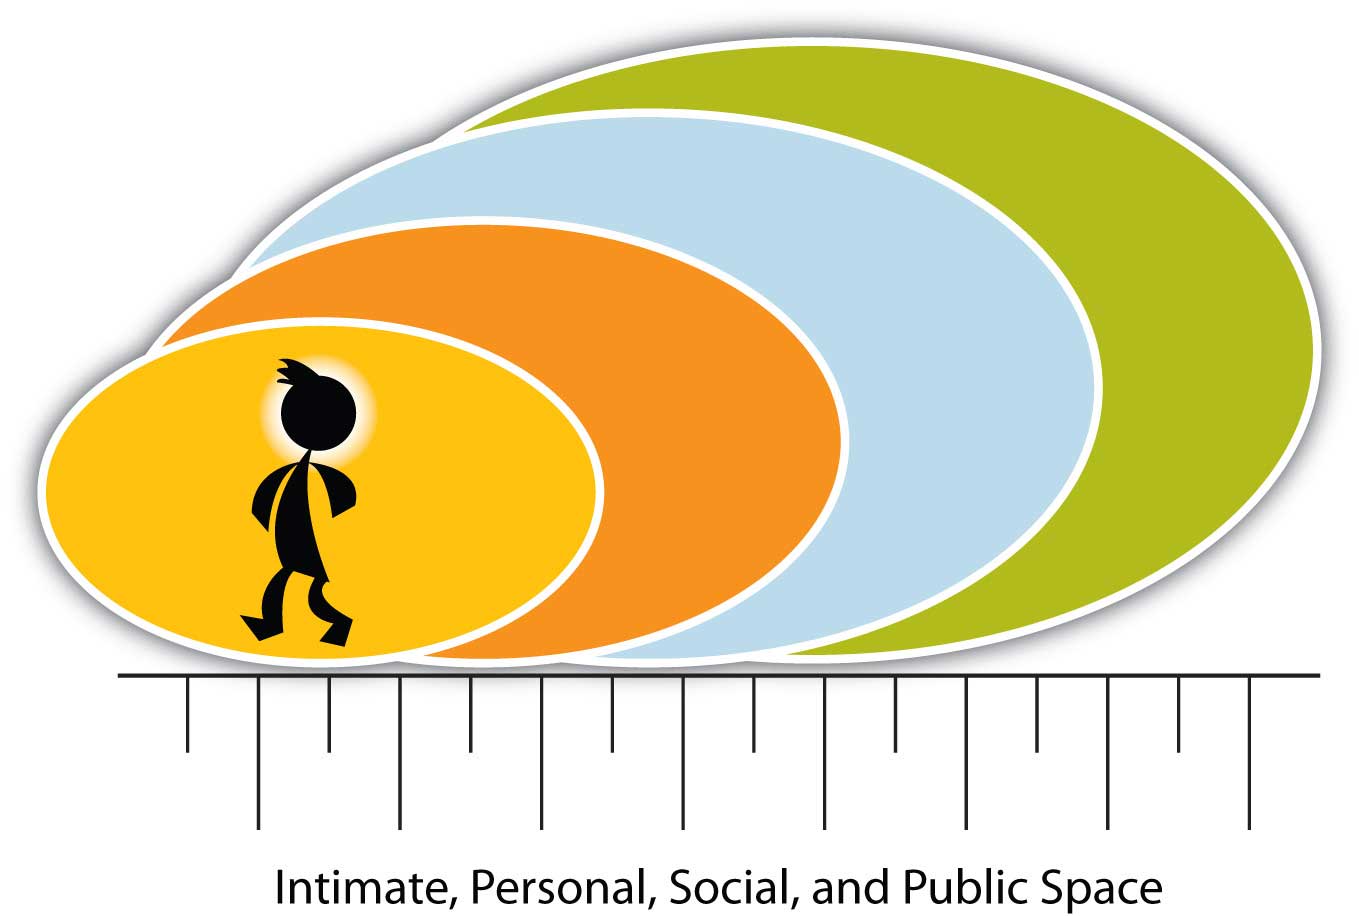 Depiction of the Four Main Categories of Distance (Intimate, Personal, Social, and Public Space)